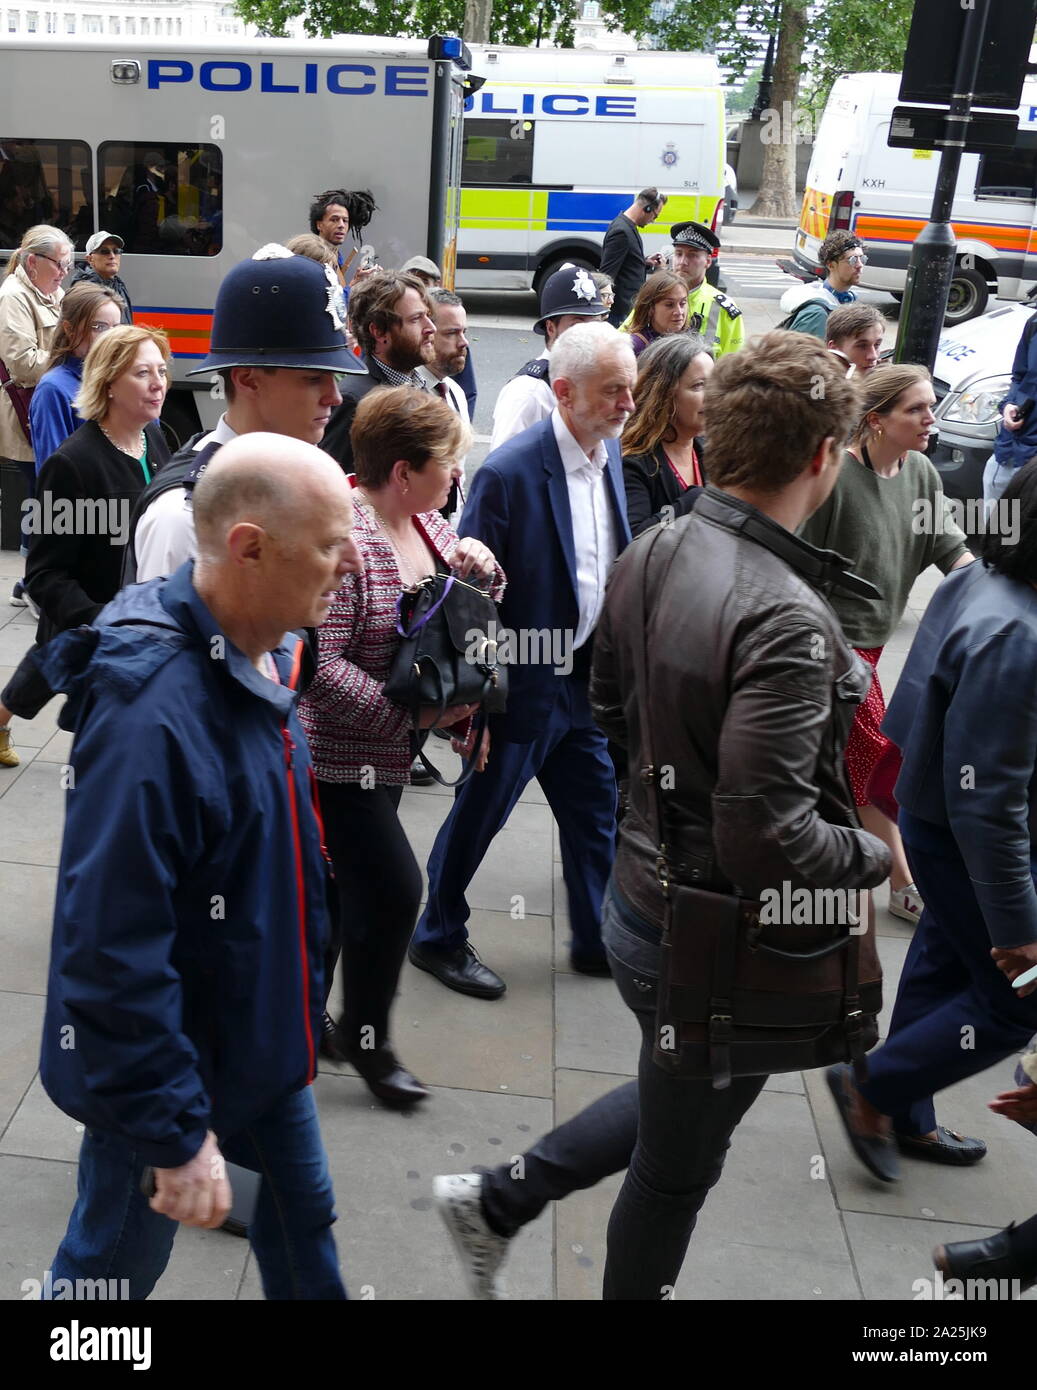 Labour Party Leader Jeremy Corbyn leaving a demonstration in Whitehall and Trafalgar Square London during the State Visit of US President Donald Trump to Great Britain; June 2019 Stock Photo